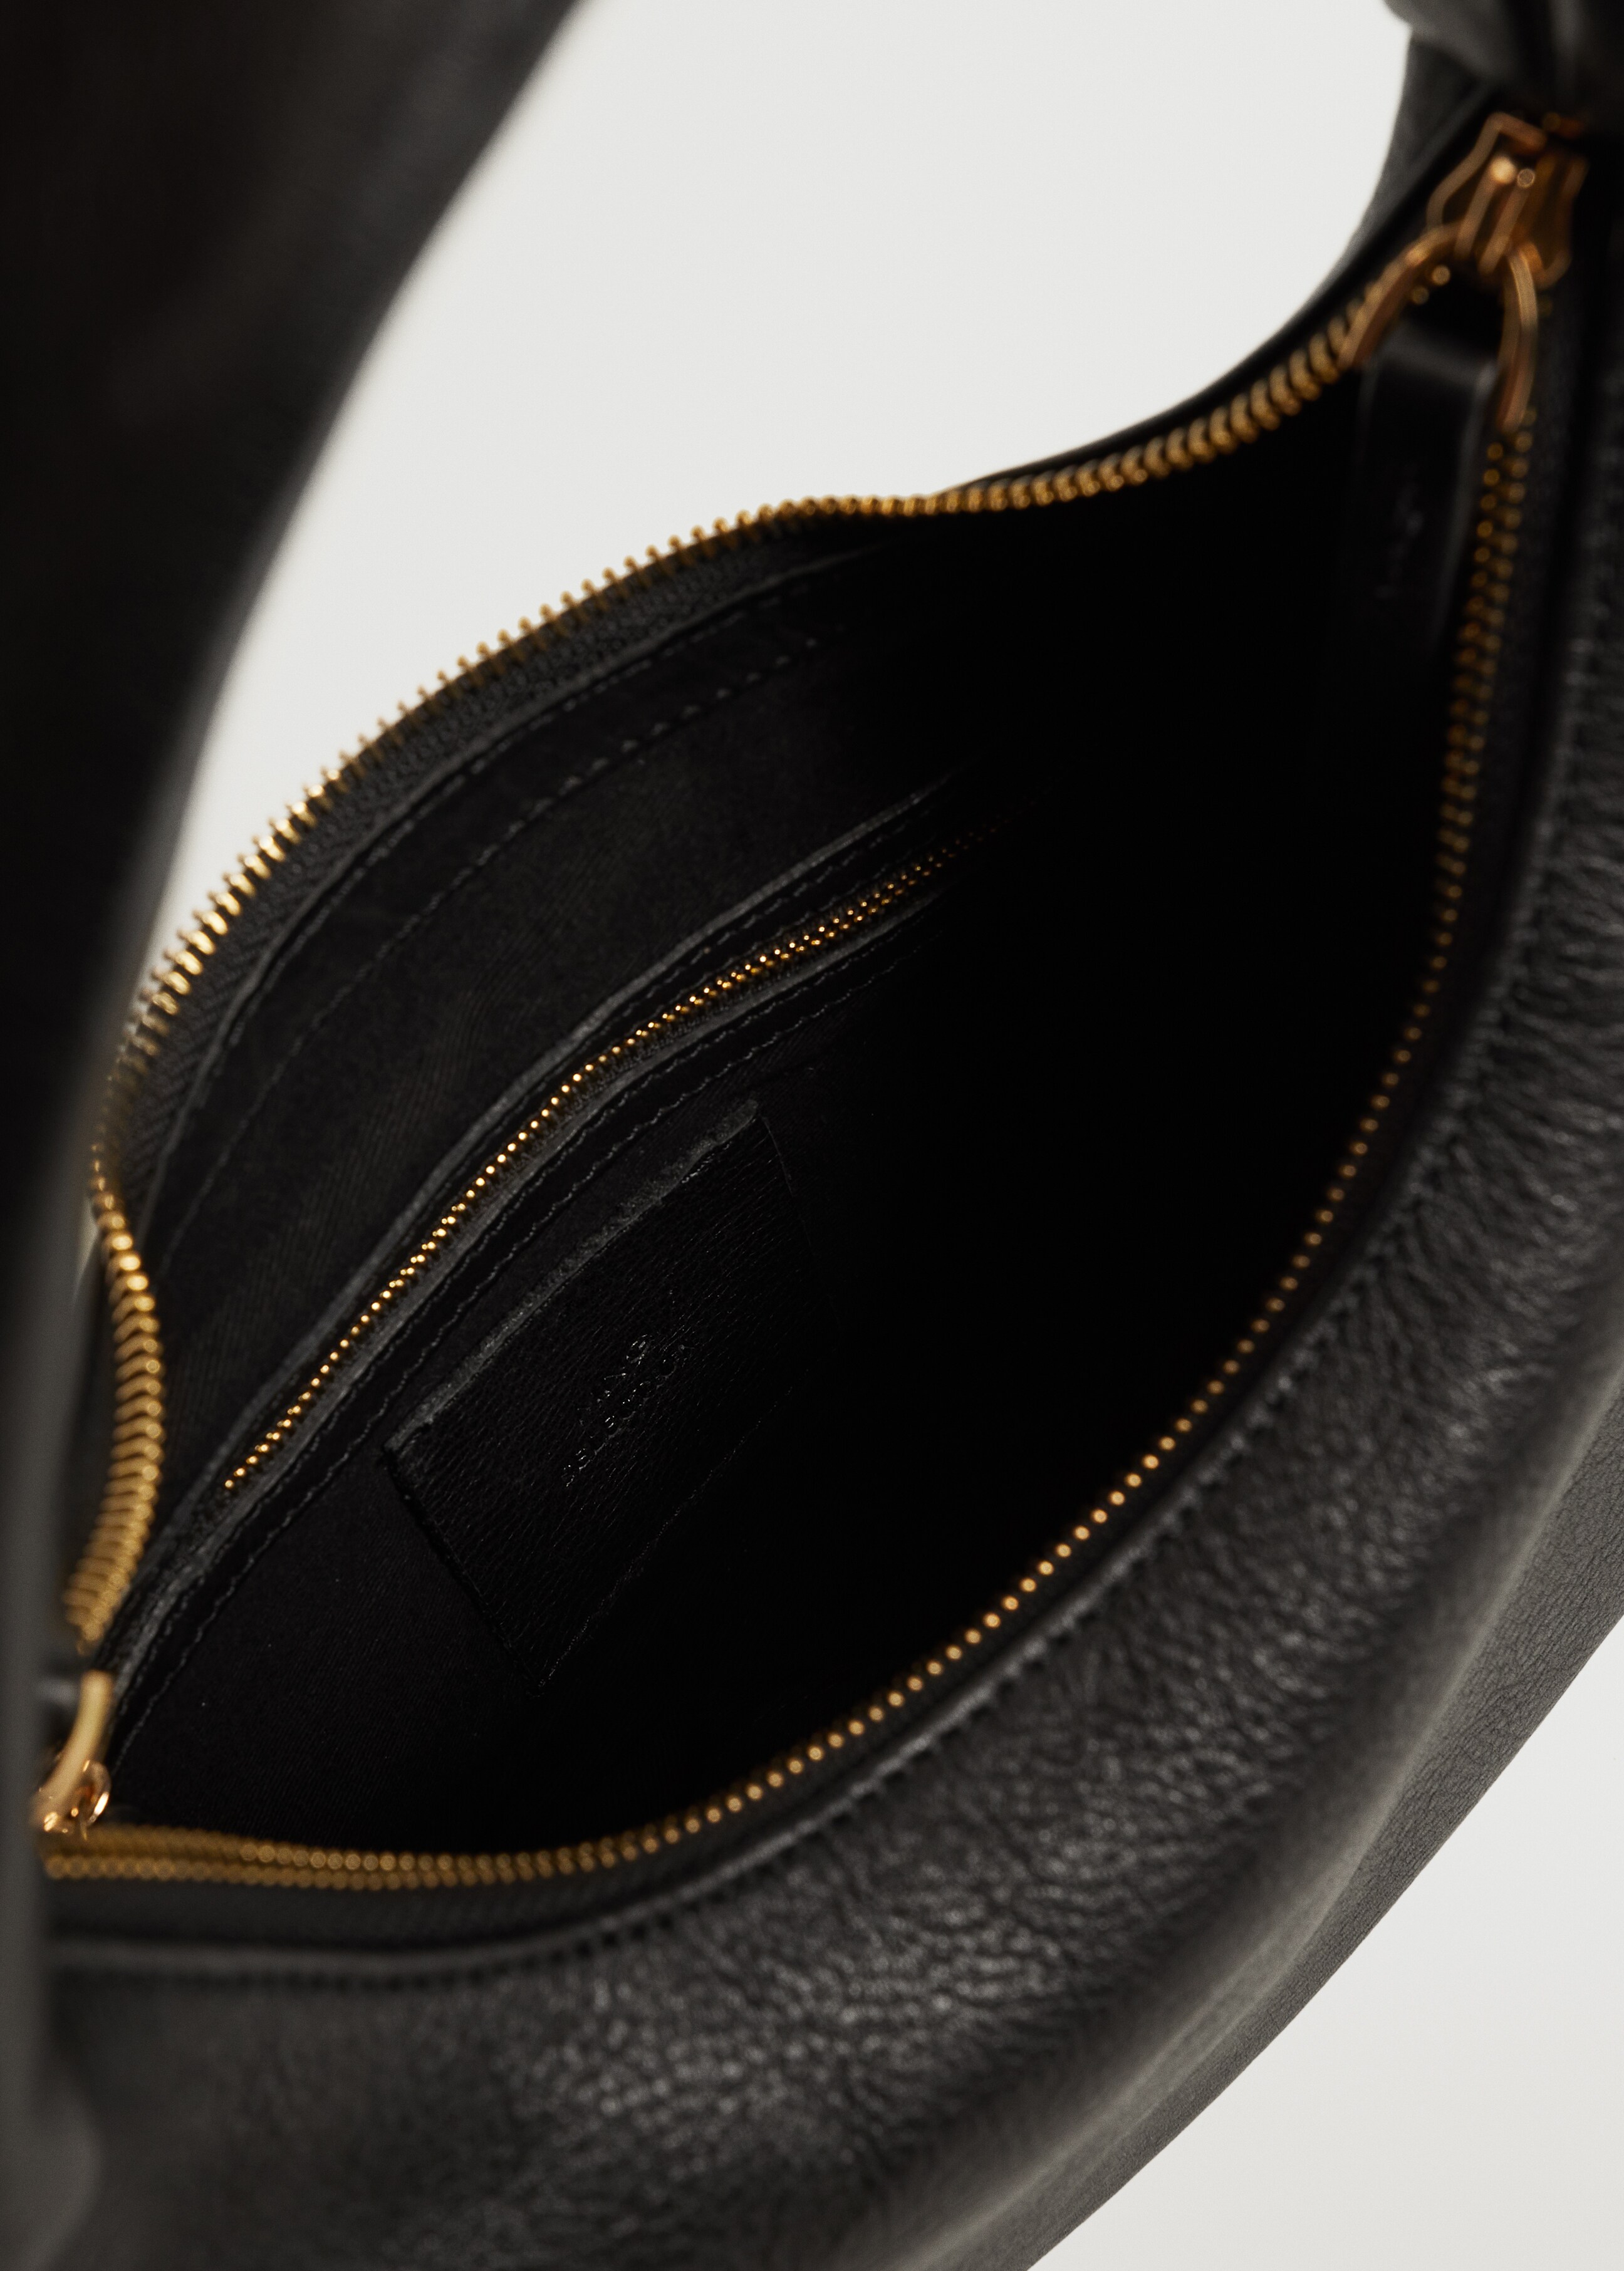 Leather baguette bag - Details of the article 2